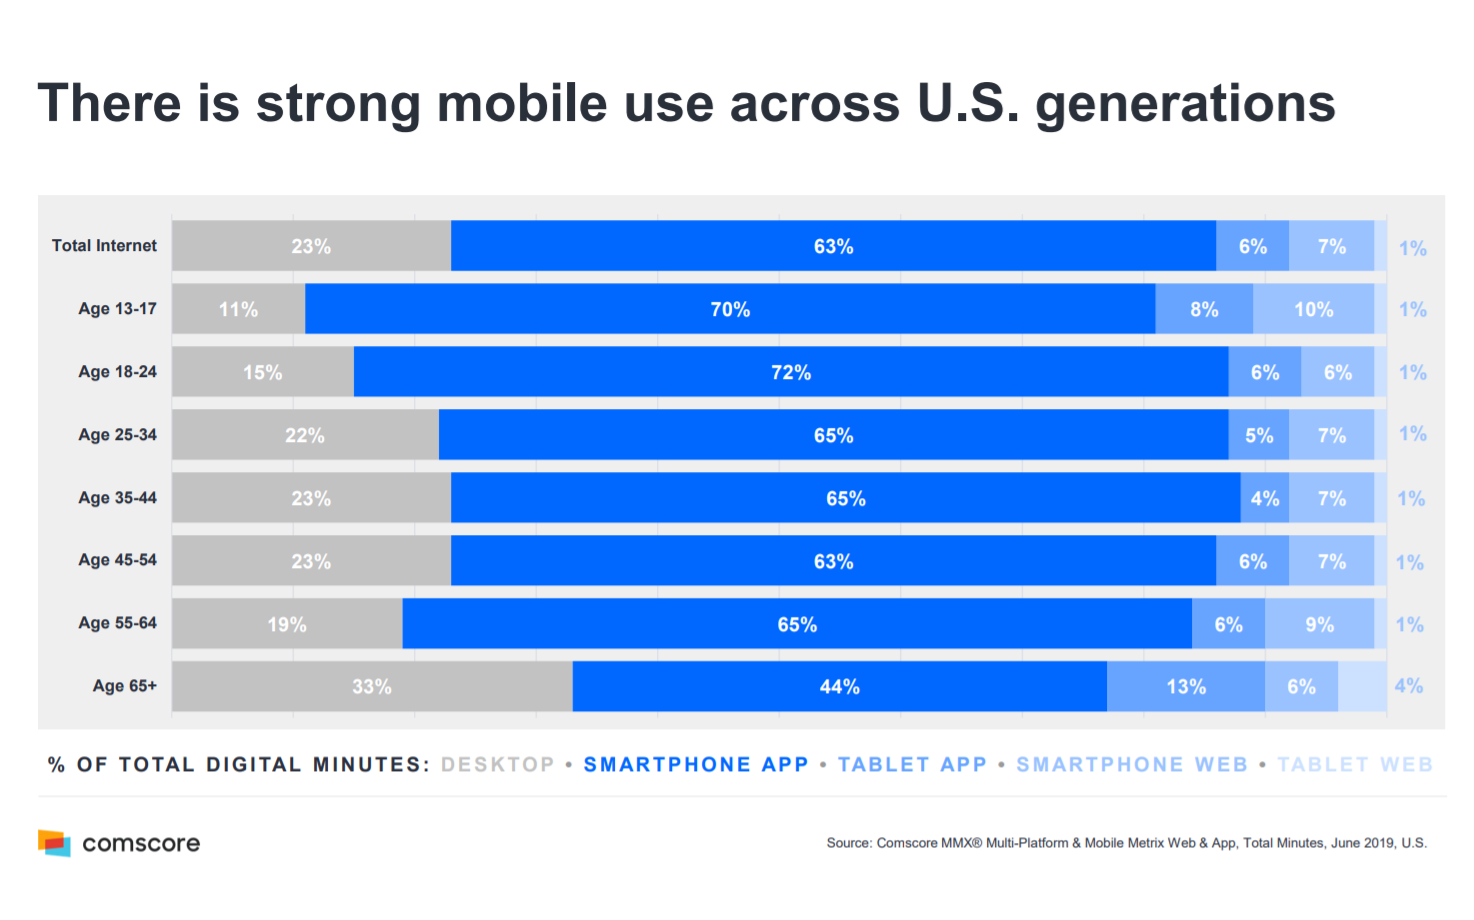 There is strong mobile use across U.S. generations